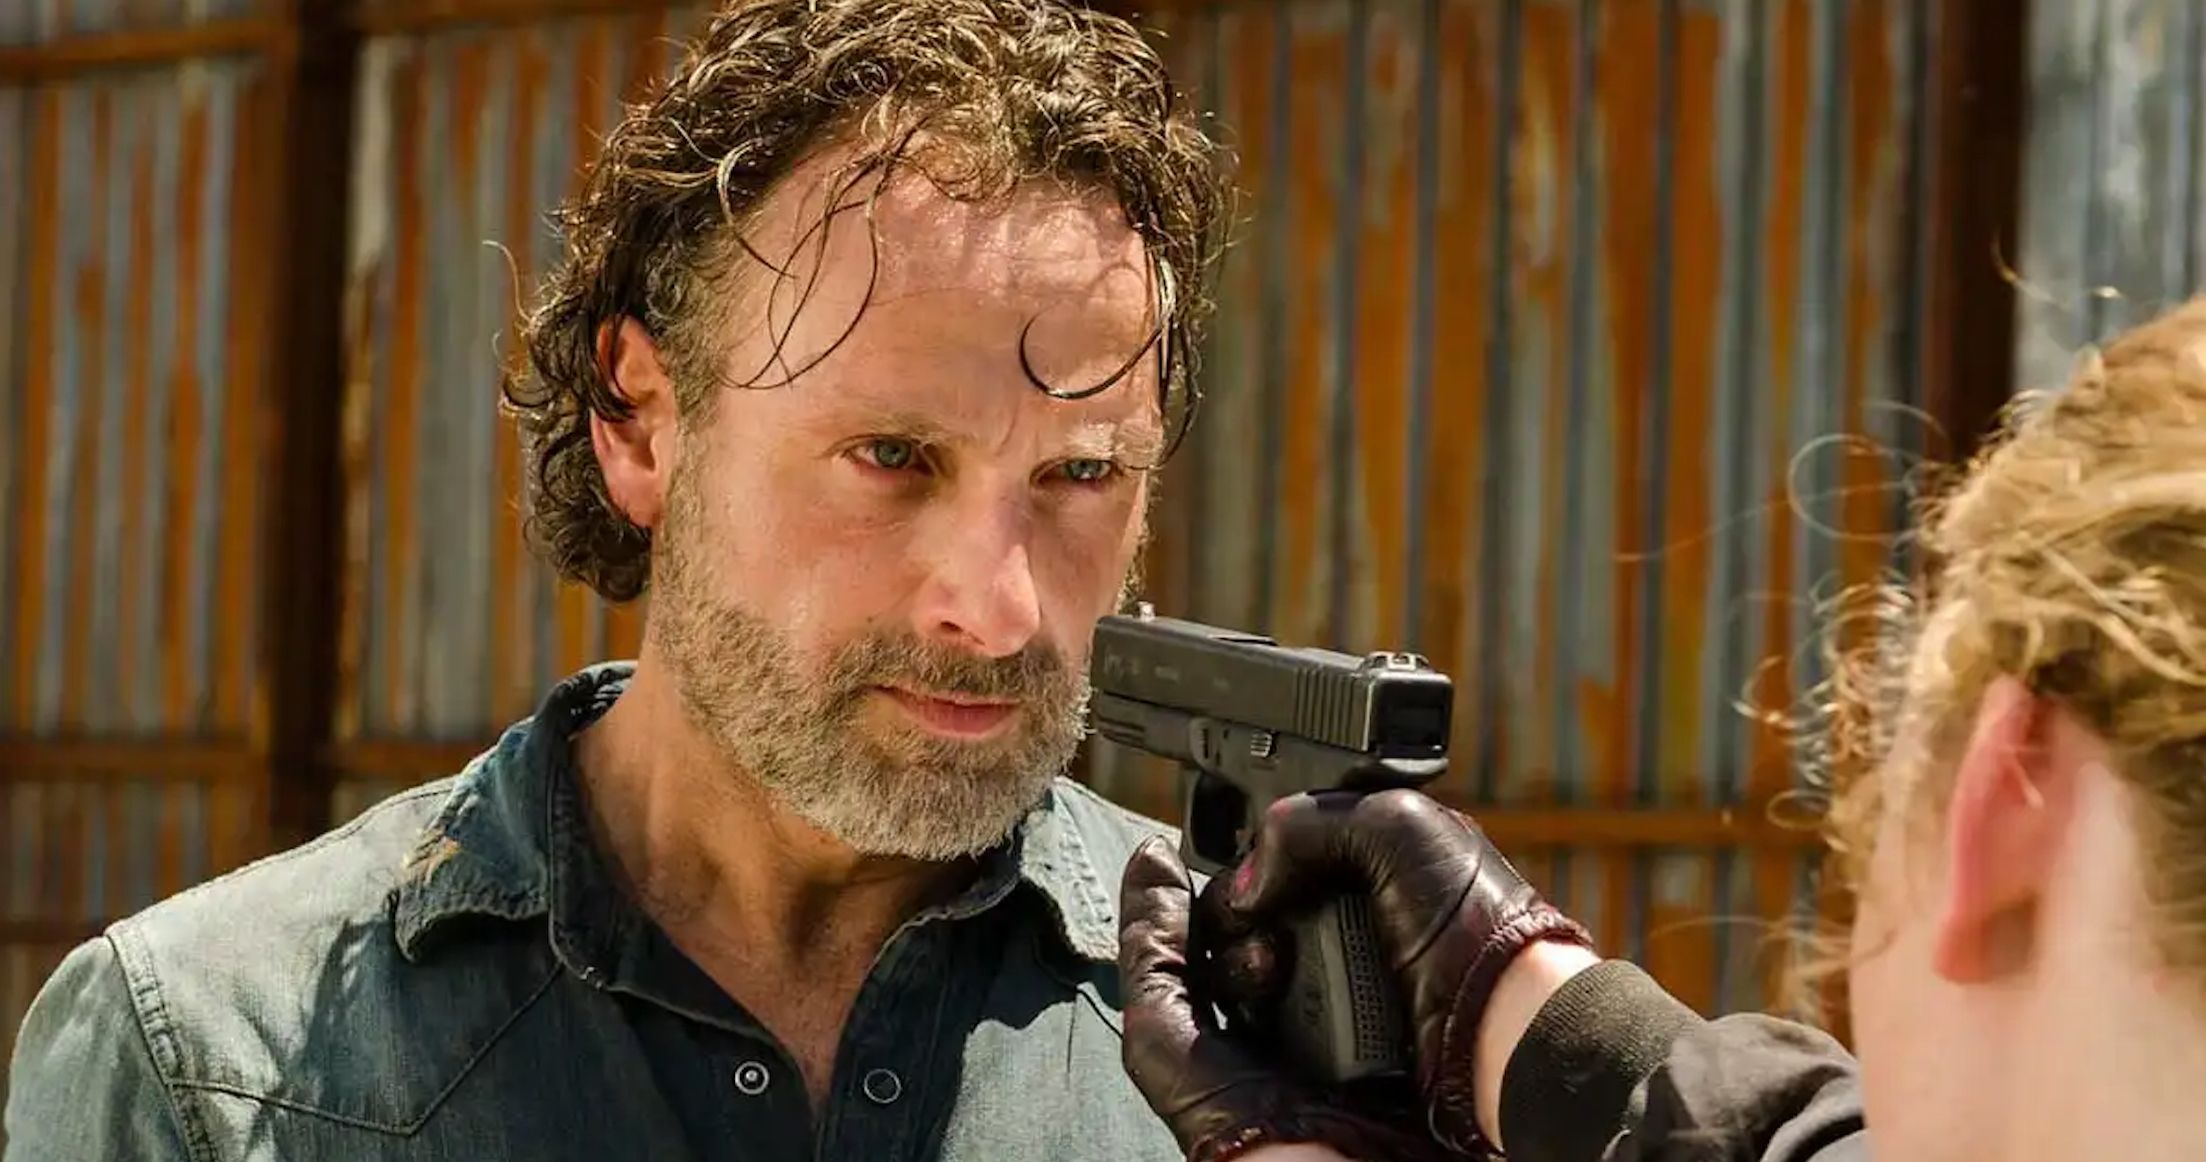 Rick Grimes Movie May Hit Theaters in 2021 Says Walking Dead Director